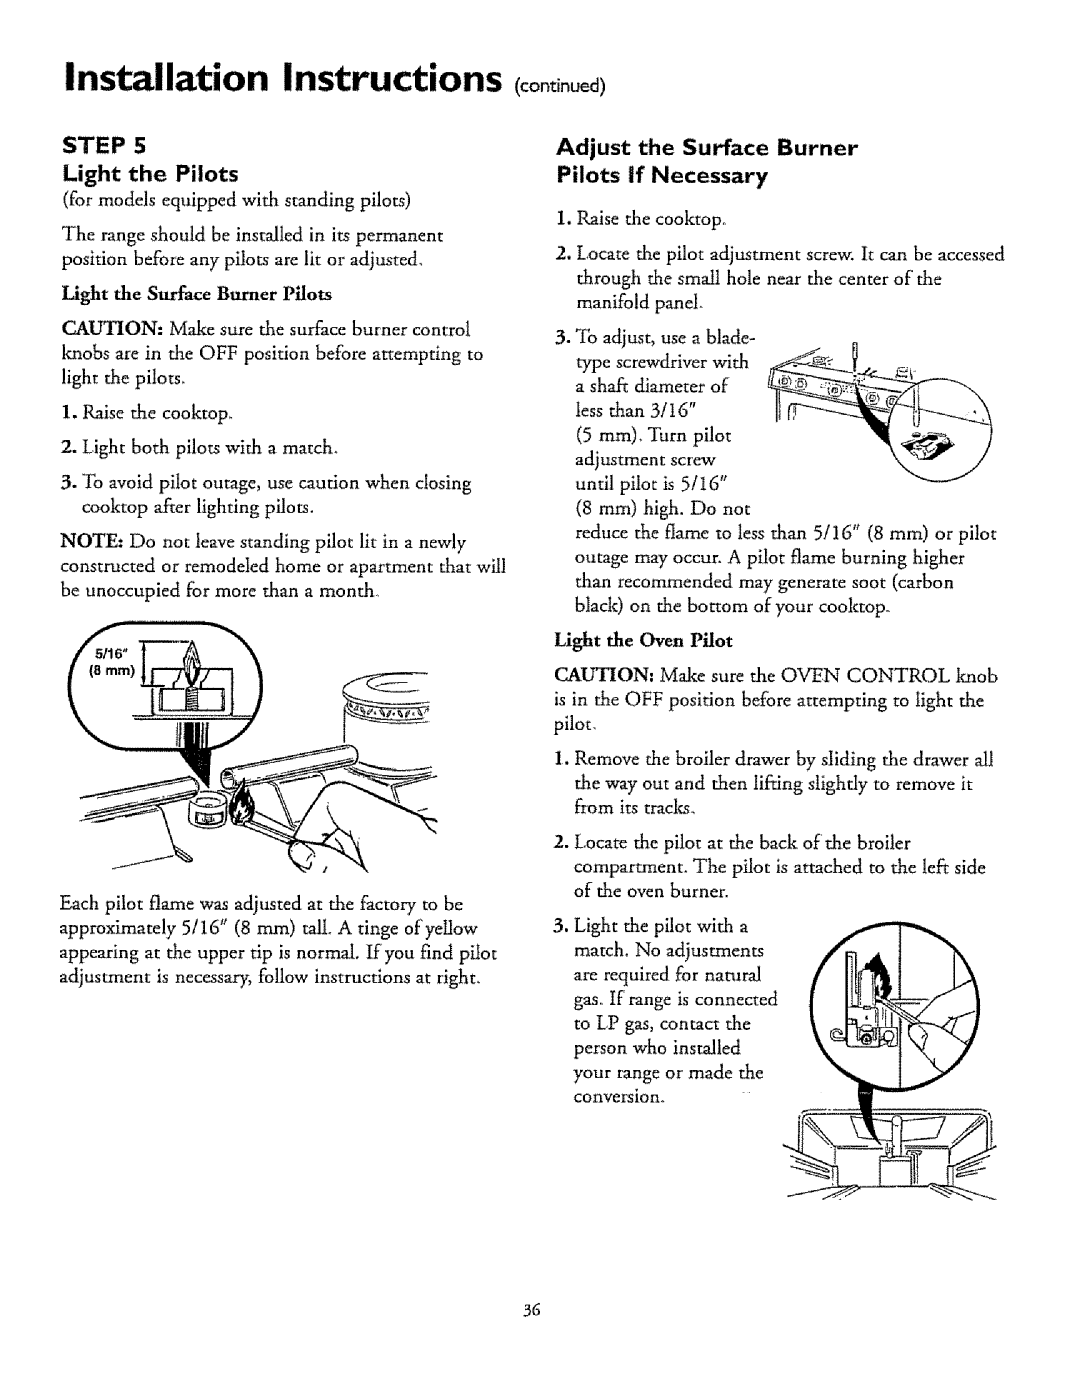 Sears 71061 Installation Instructions o0 ,0uod, Step, Light the Pilots, Adjust the Surface Burner Pilots If Necessary 